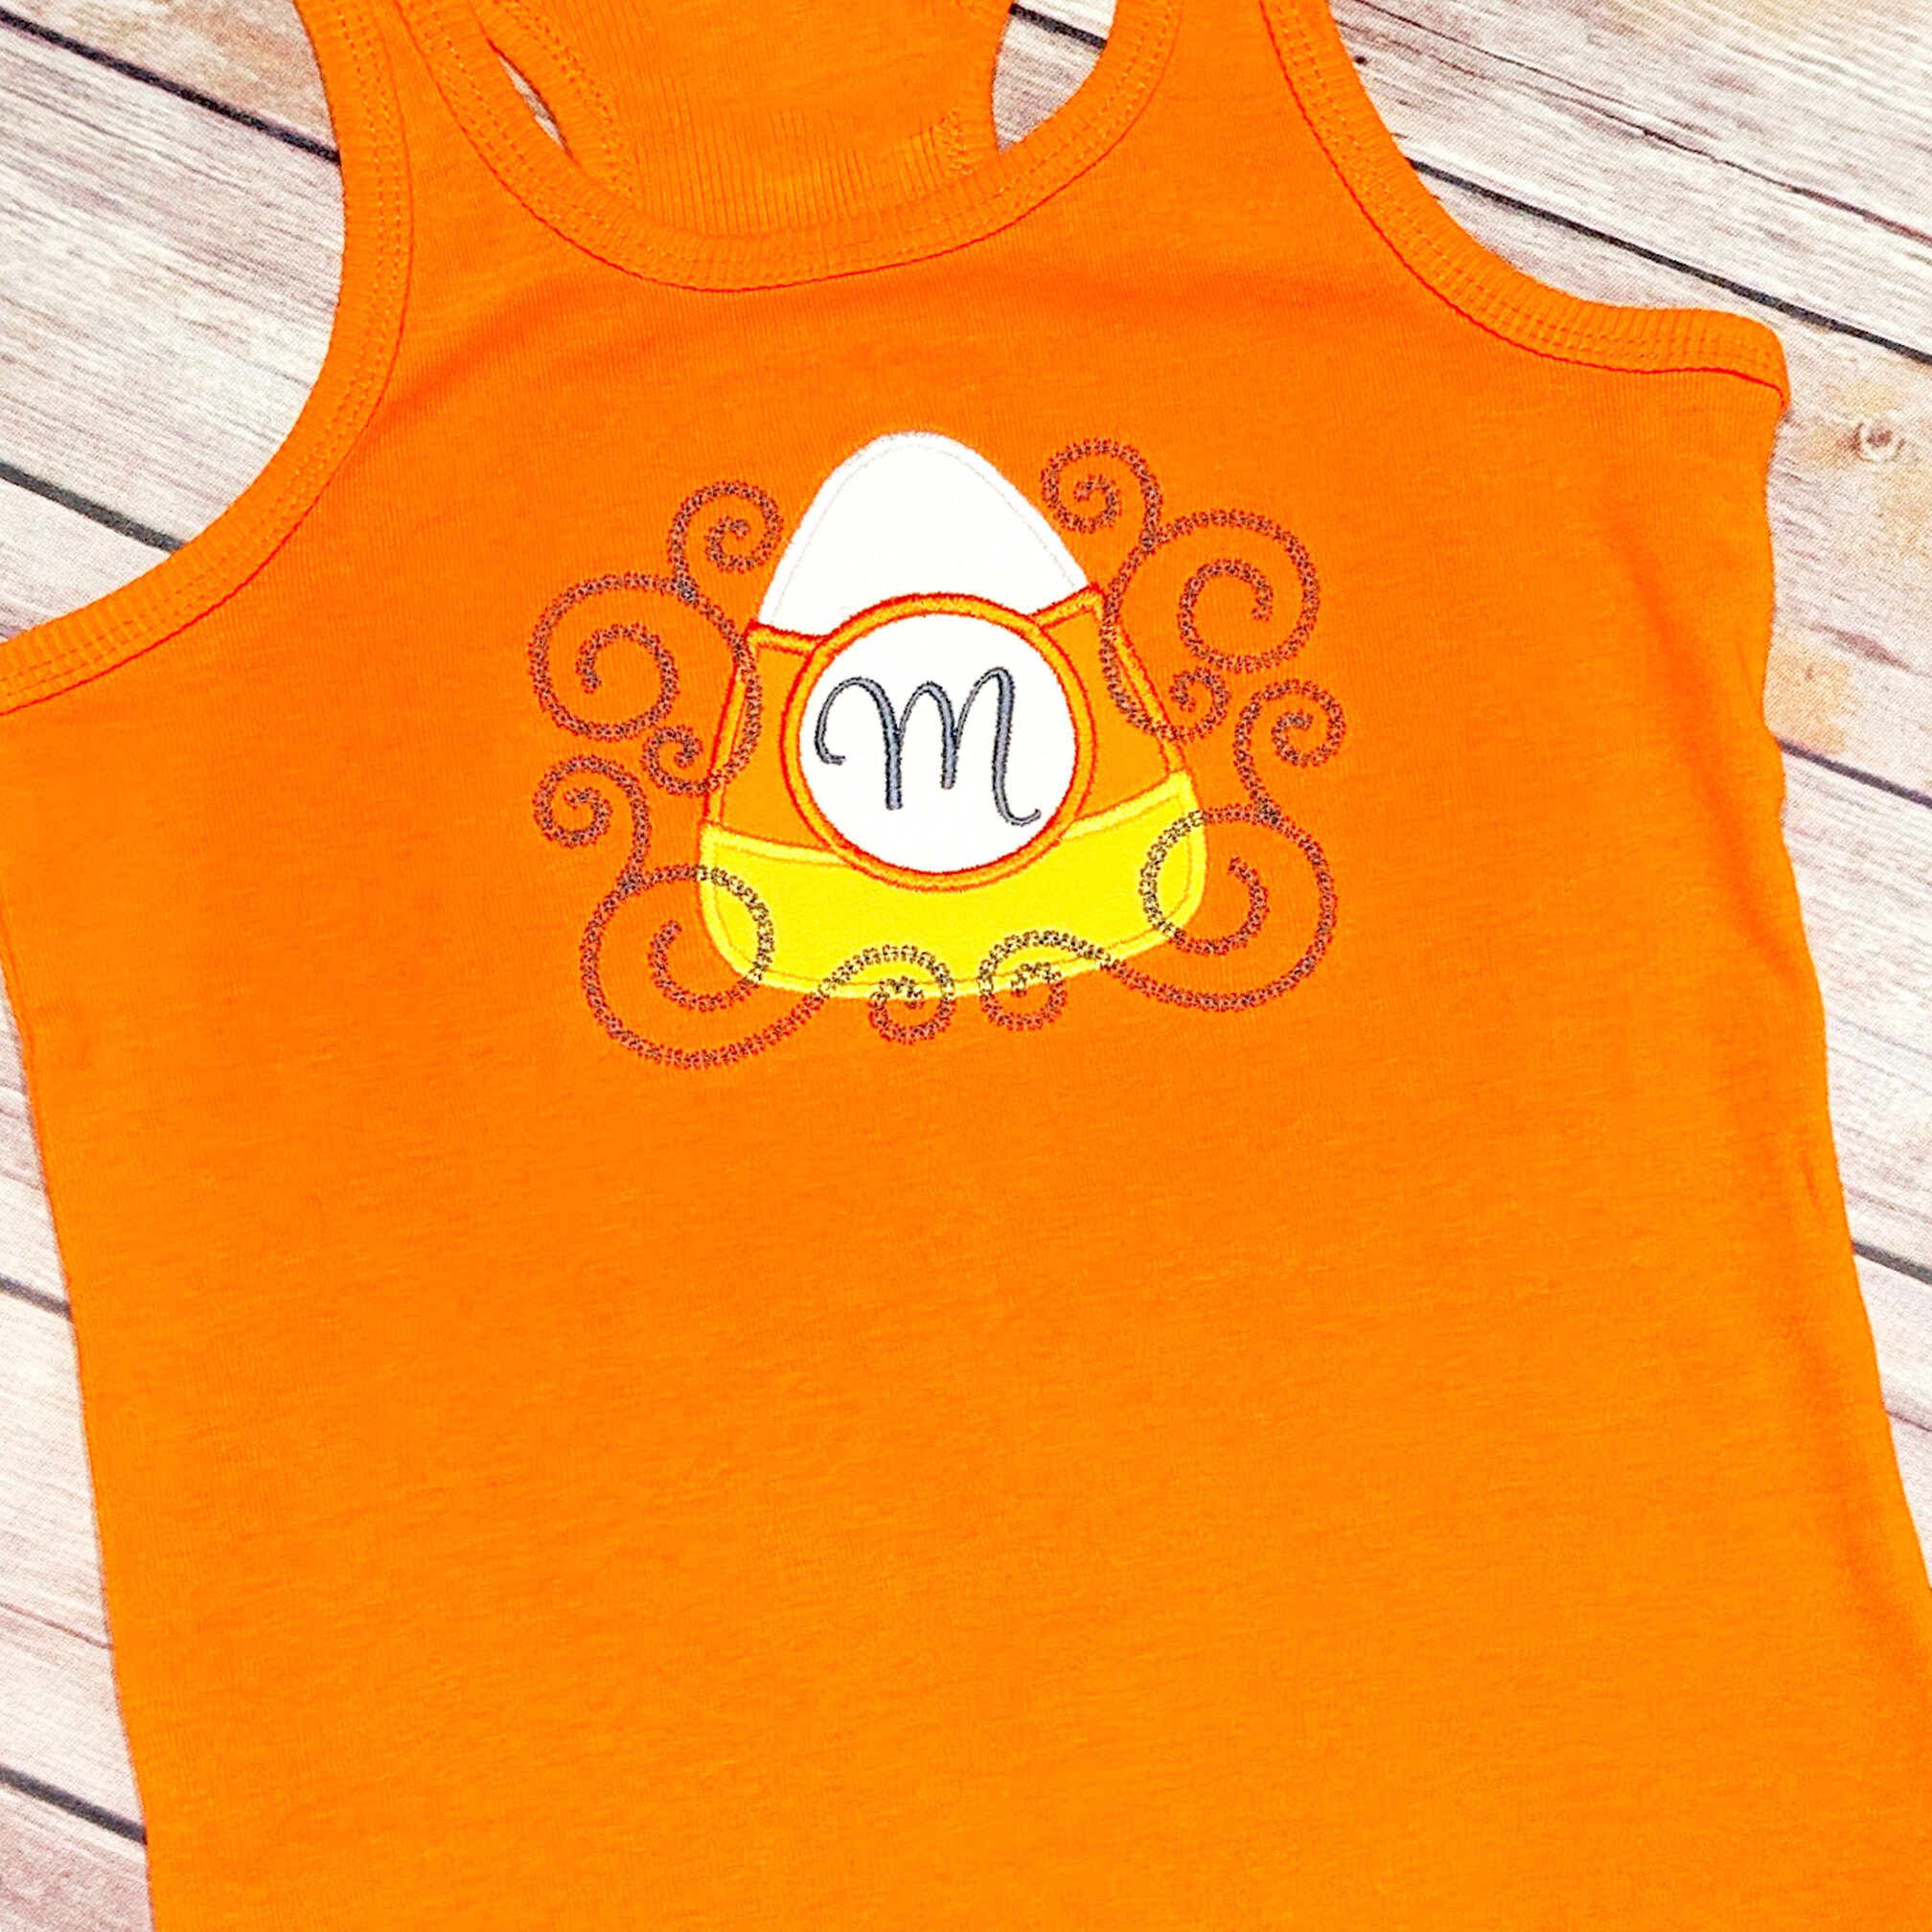 Discover Girls Fall Shirt  Girl Candy Corn Monogram Tee  Orange Yellow White Black Swirls  Toddler Initial T-Shirt  Personalized Embroidered Top